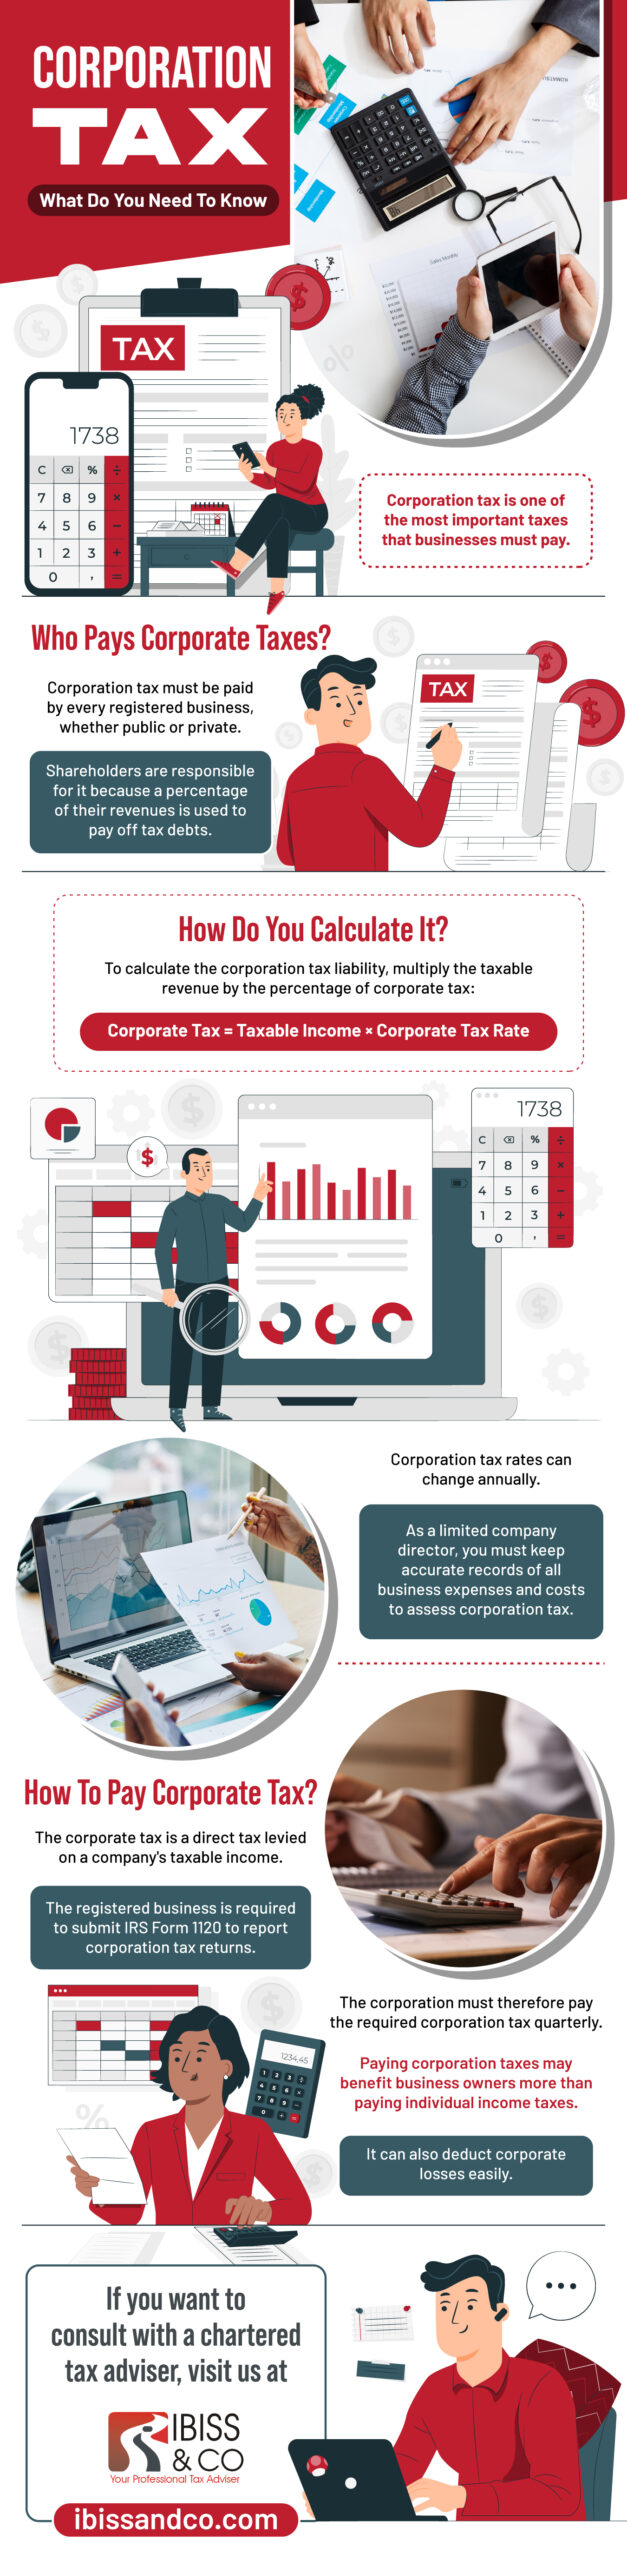 Corporation Tax: What Do You Need To Know-INFOGRAPHIC